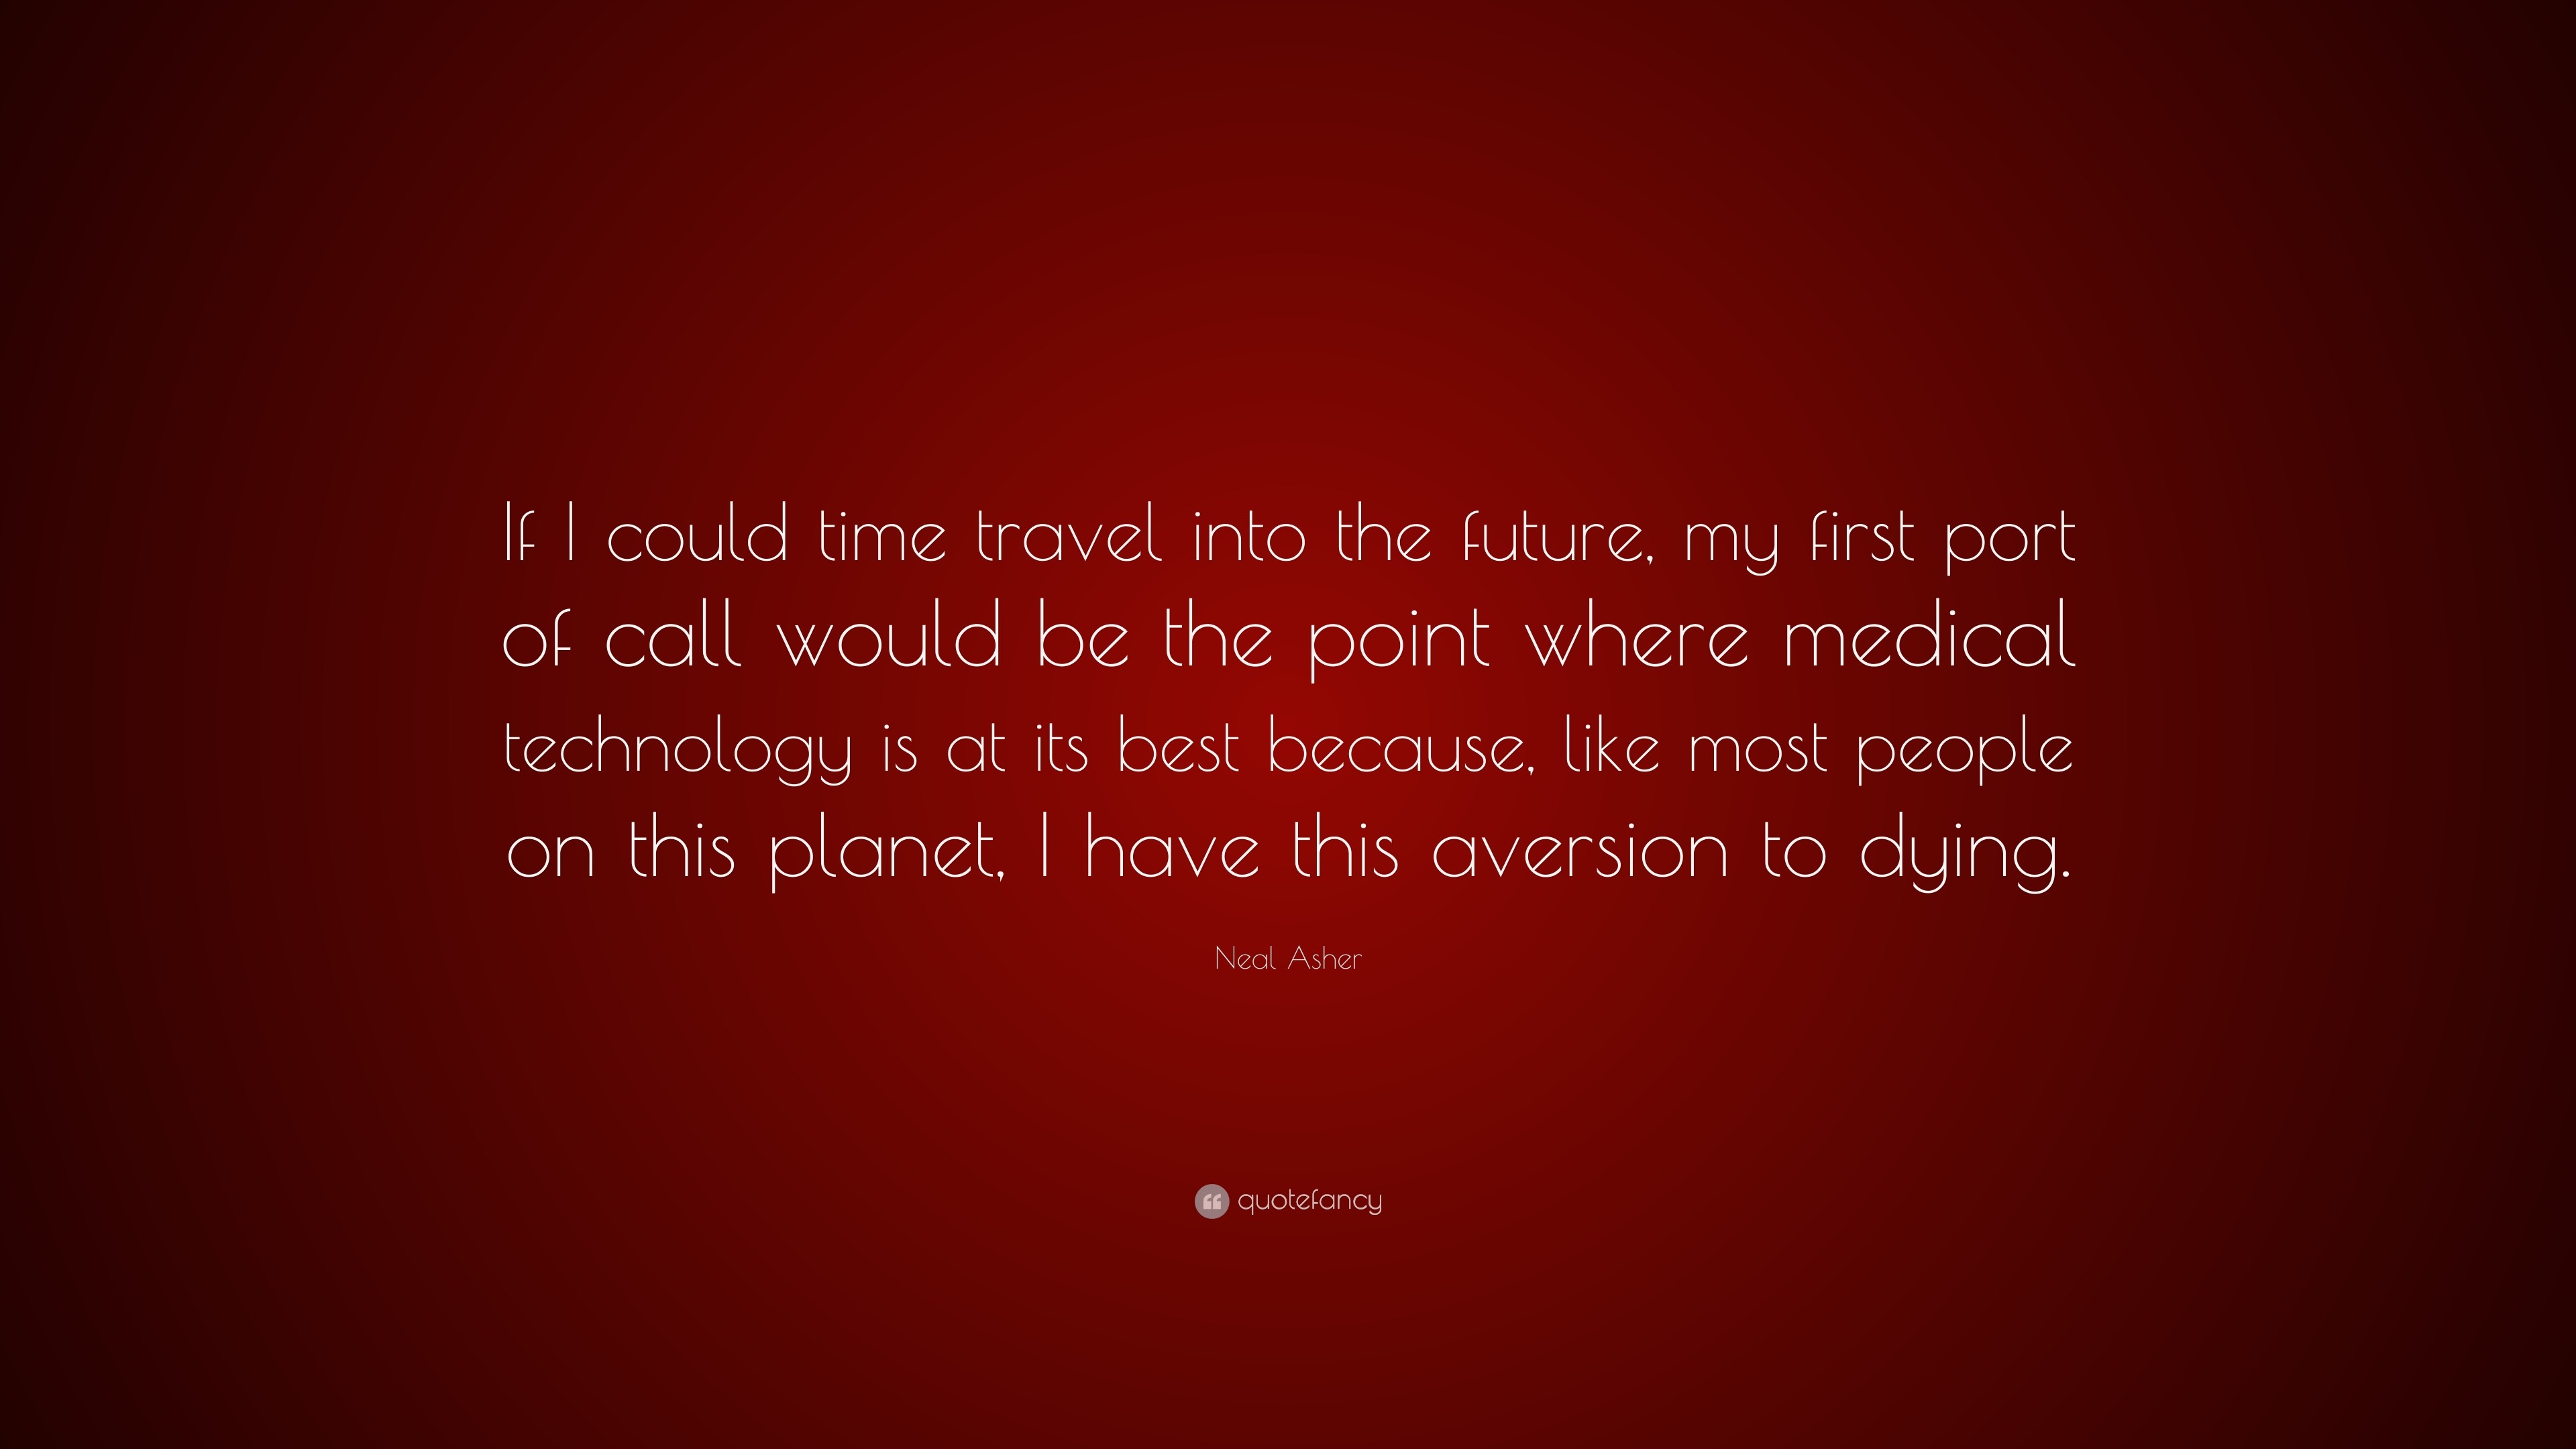 https://quotefancy.com/media/wallpaper/3840x2160/1655164-Neal-Asher-Quote-If-I-could-time-travel-into-the-future-my-first.jpg